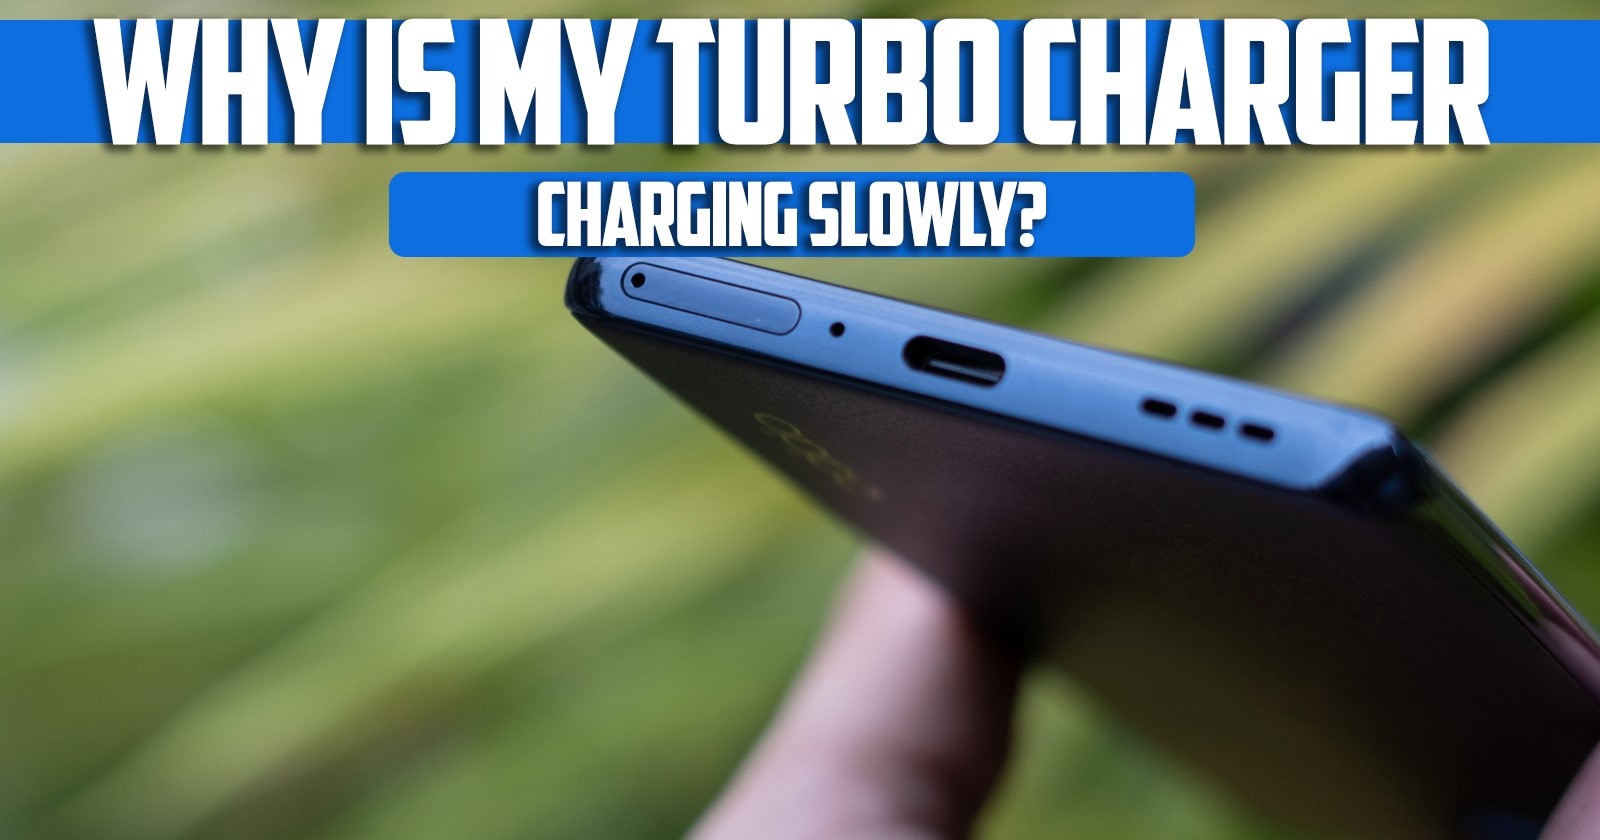 Why is my turbo charger charging slowly?